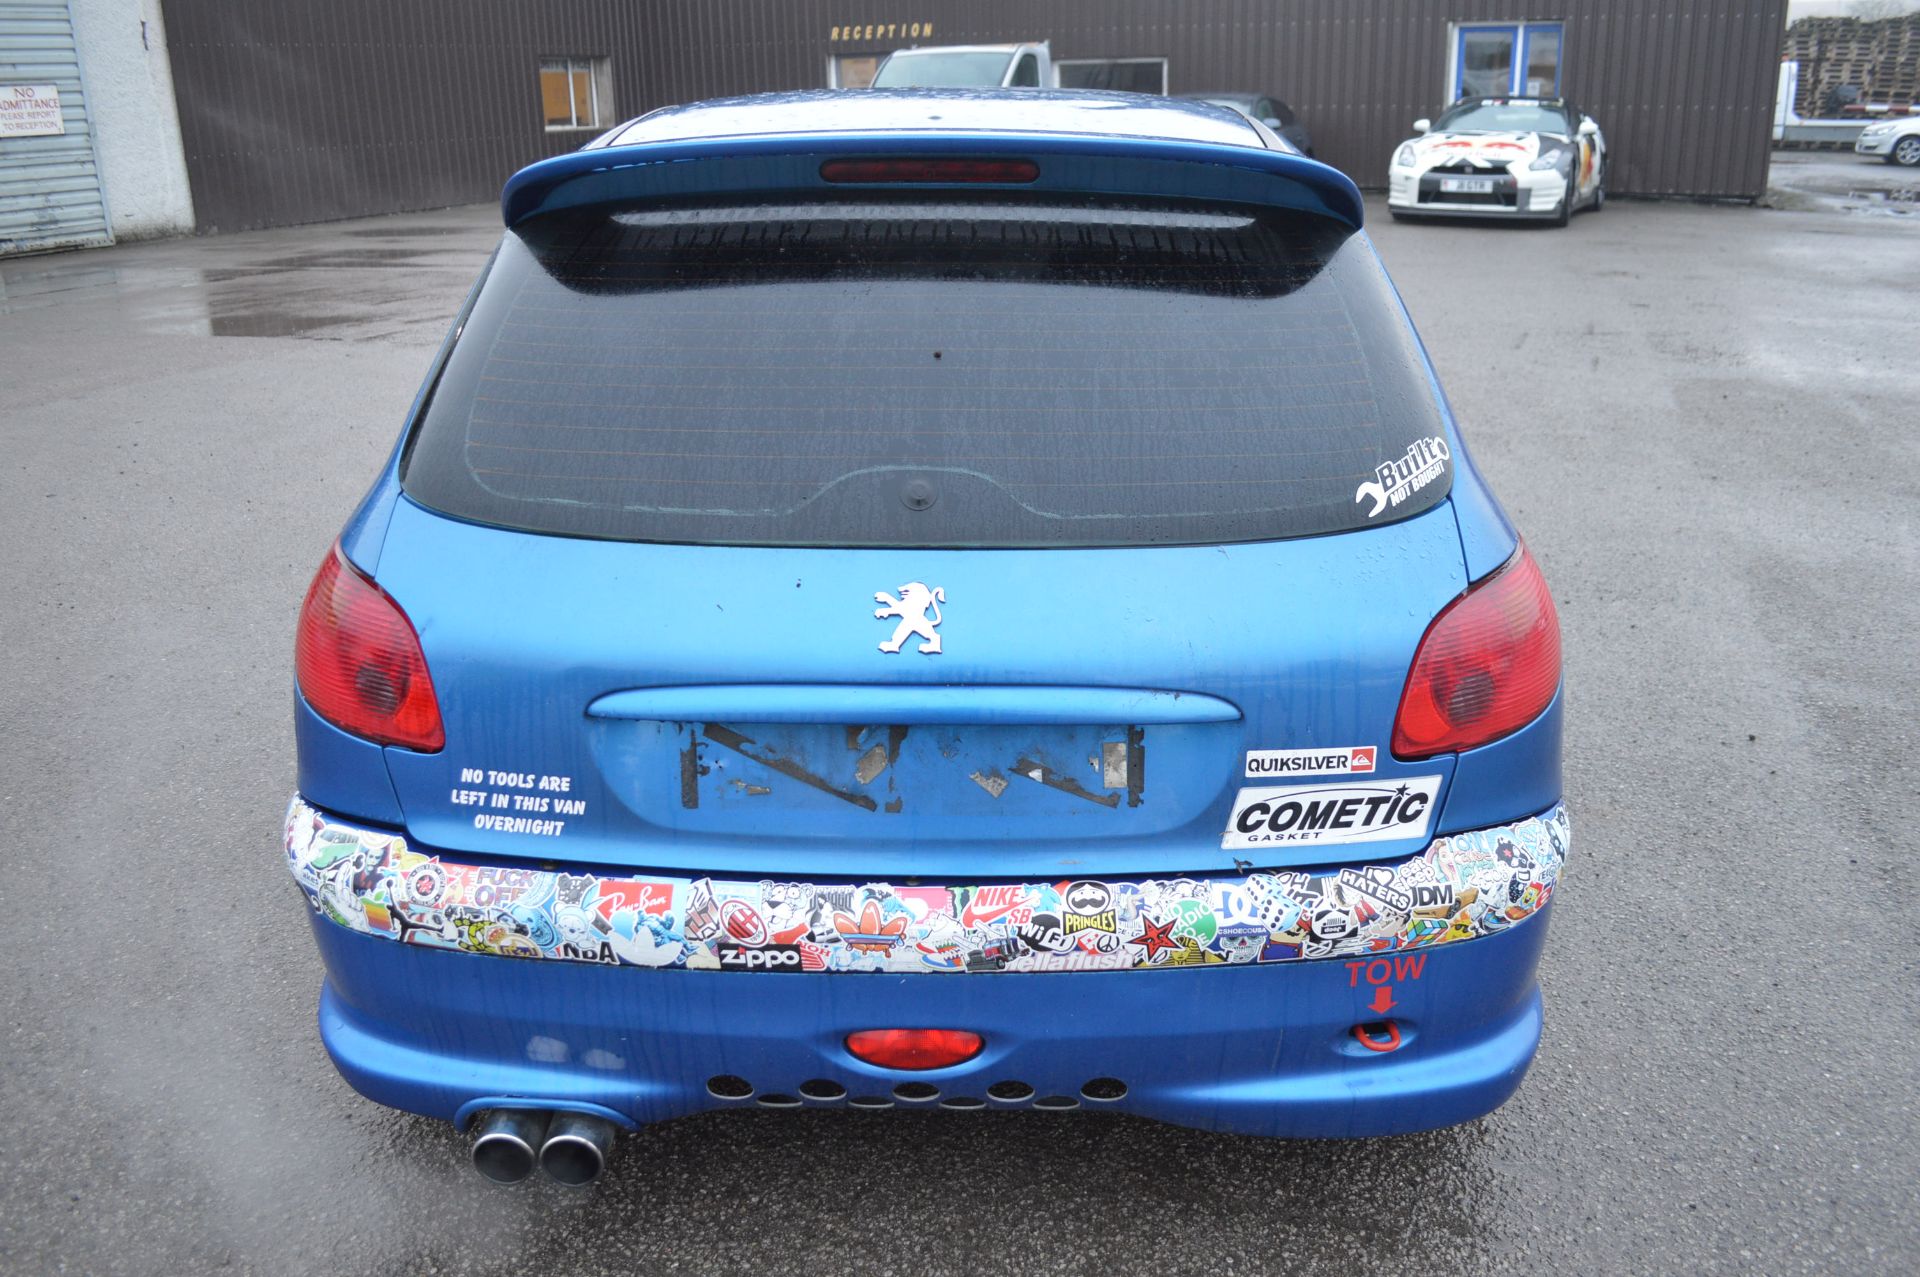 2003/03 REG PEUGEOT 206 GTI 180HP FAST TRACK DAY CAR  HAS THE 'VAN' PANELS FITTED INSTEAD OF REAR - Image 5 of 15